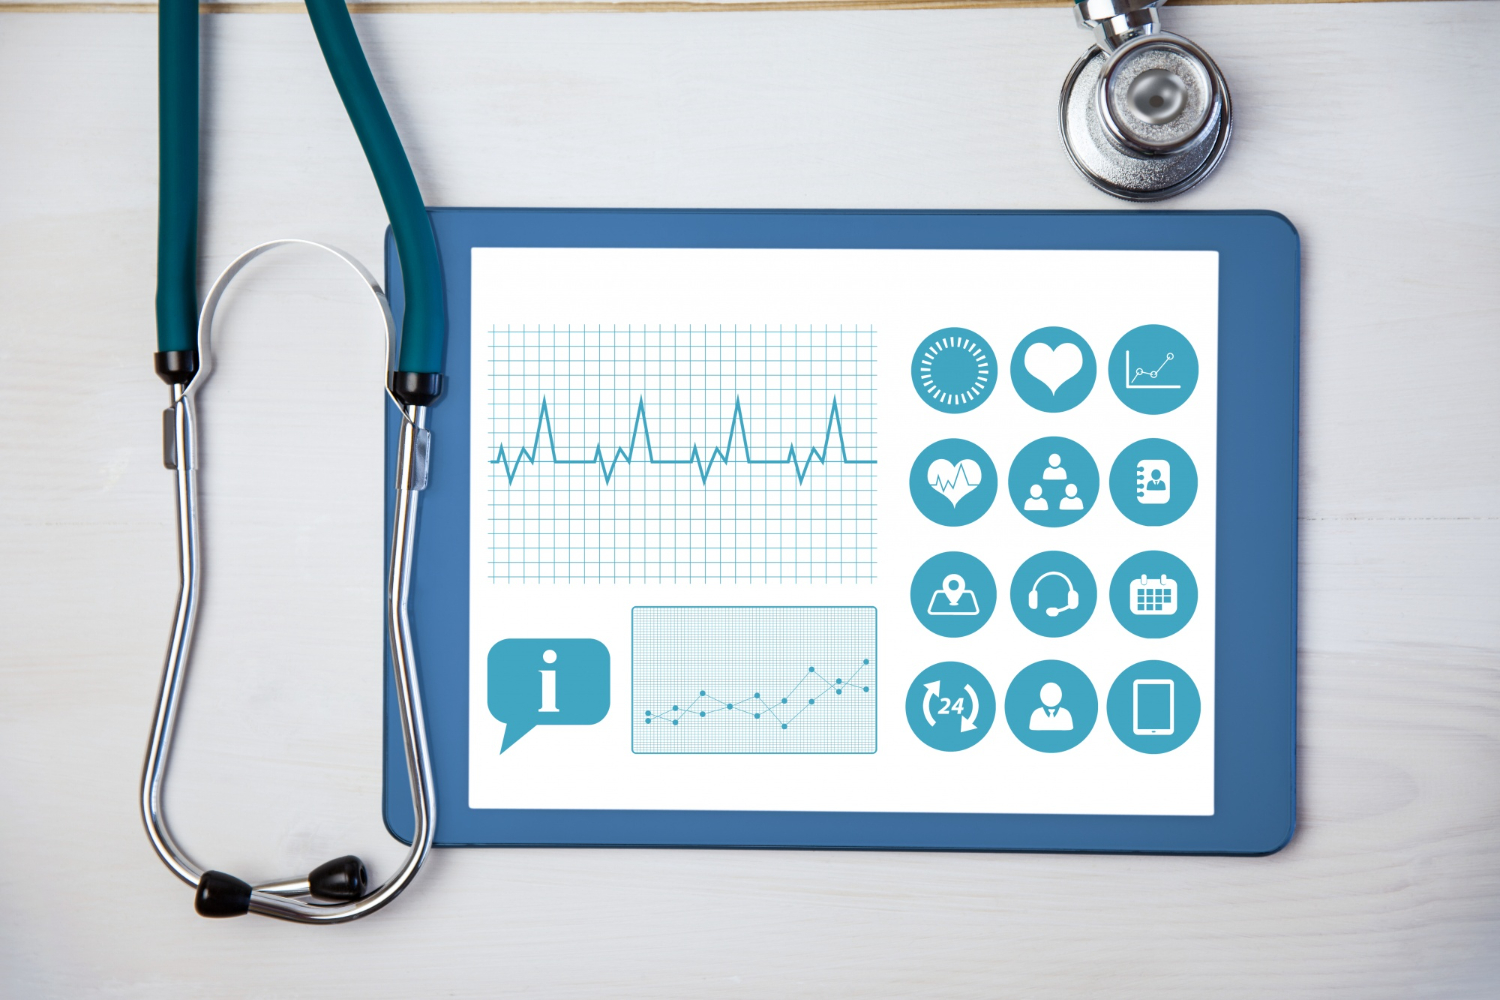 Tablet medical application and health interoperability